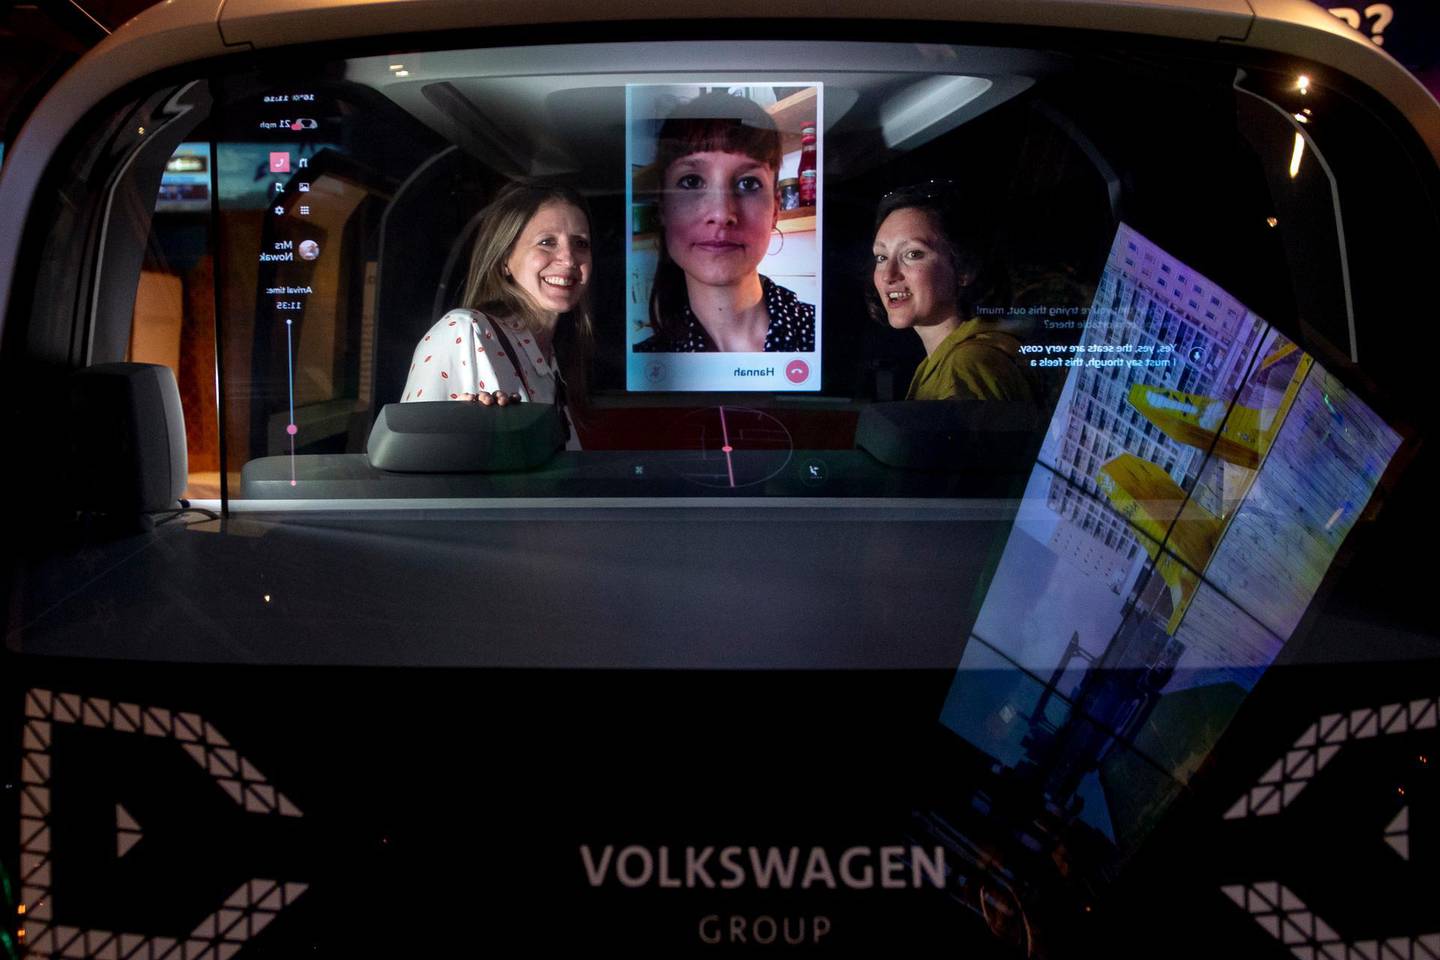 epa06721941 Members of the public sit in a Sedric' Volkswagen driverless concept car during a media preview of 'The Future Starts Here' Exhibition at the Victoria and Albert (V&A) Museum in central London, Britain, 09 May 2018. The exhibition features over 100 objects currently in development intended to bring further automation to the everyday tasks.  EPA/WILL OLIVER